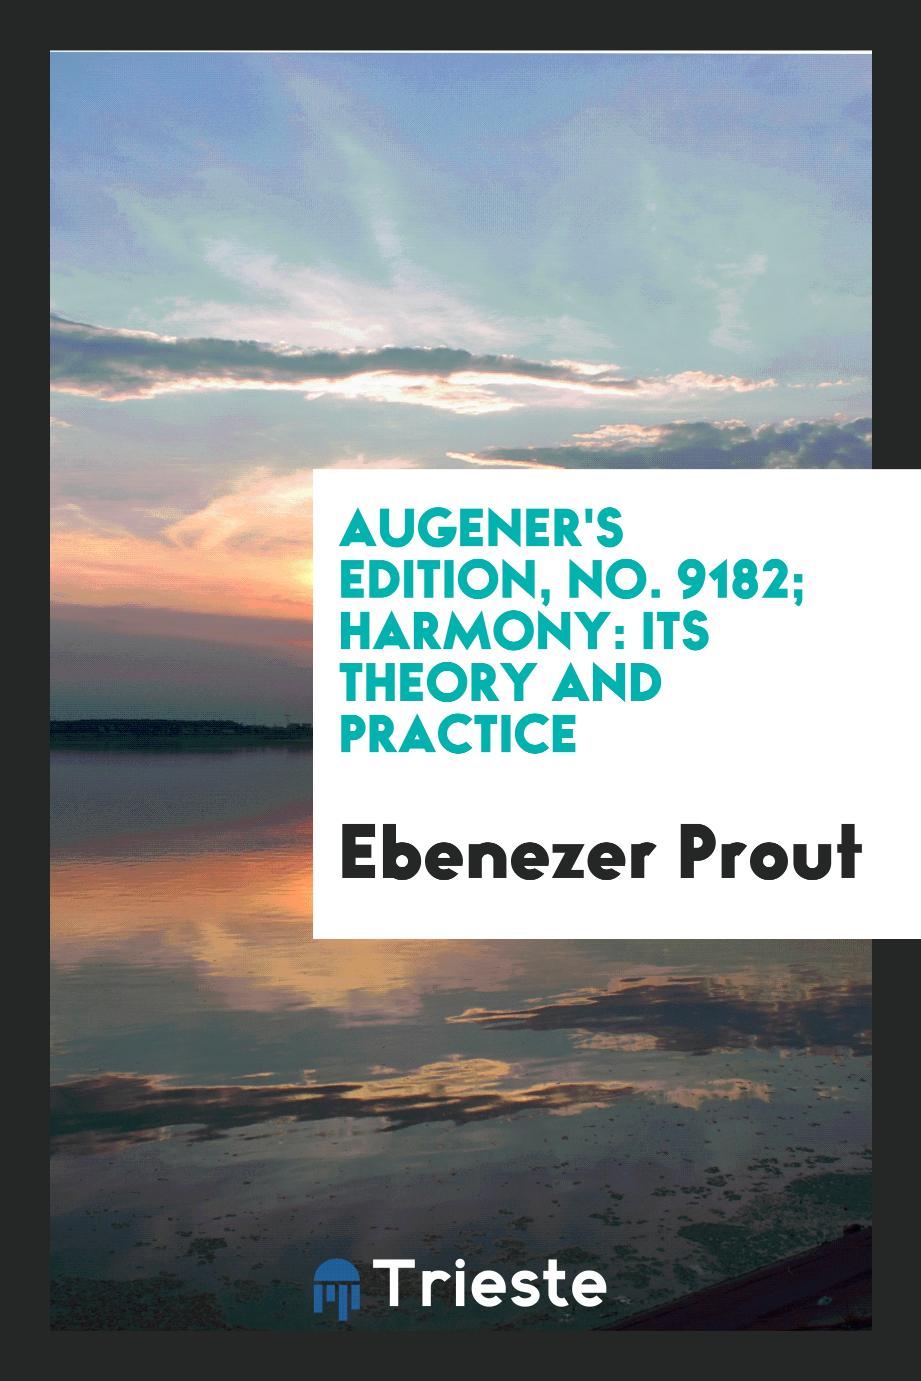 Augener's edition, No. 9182; Harmony: its theory and practice